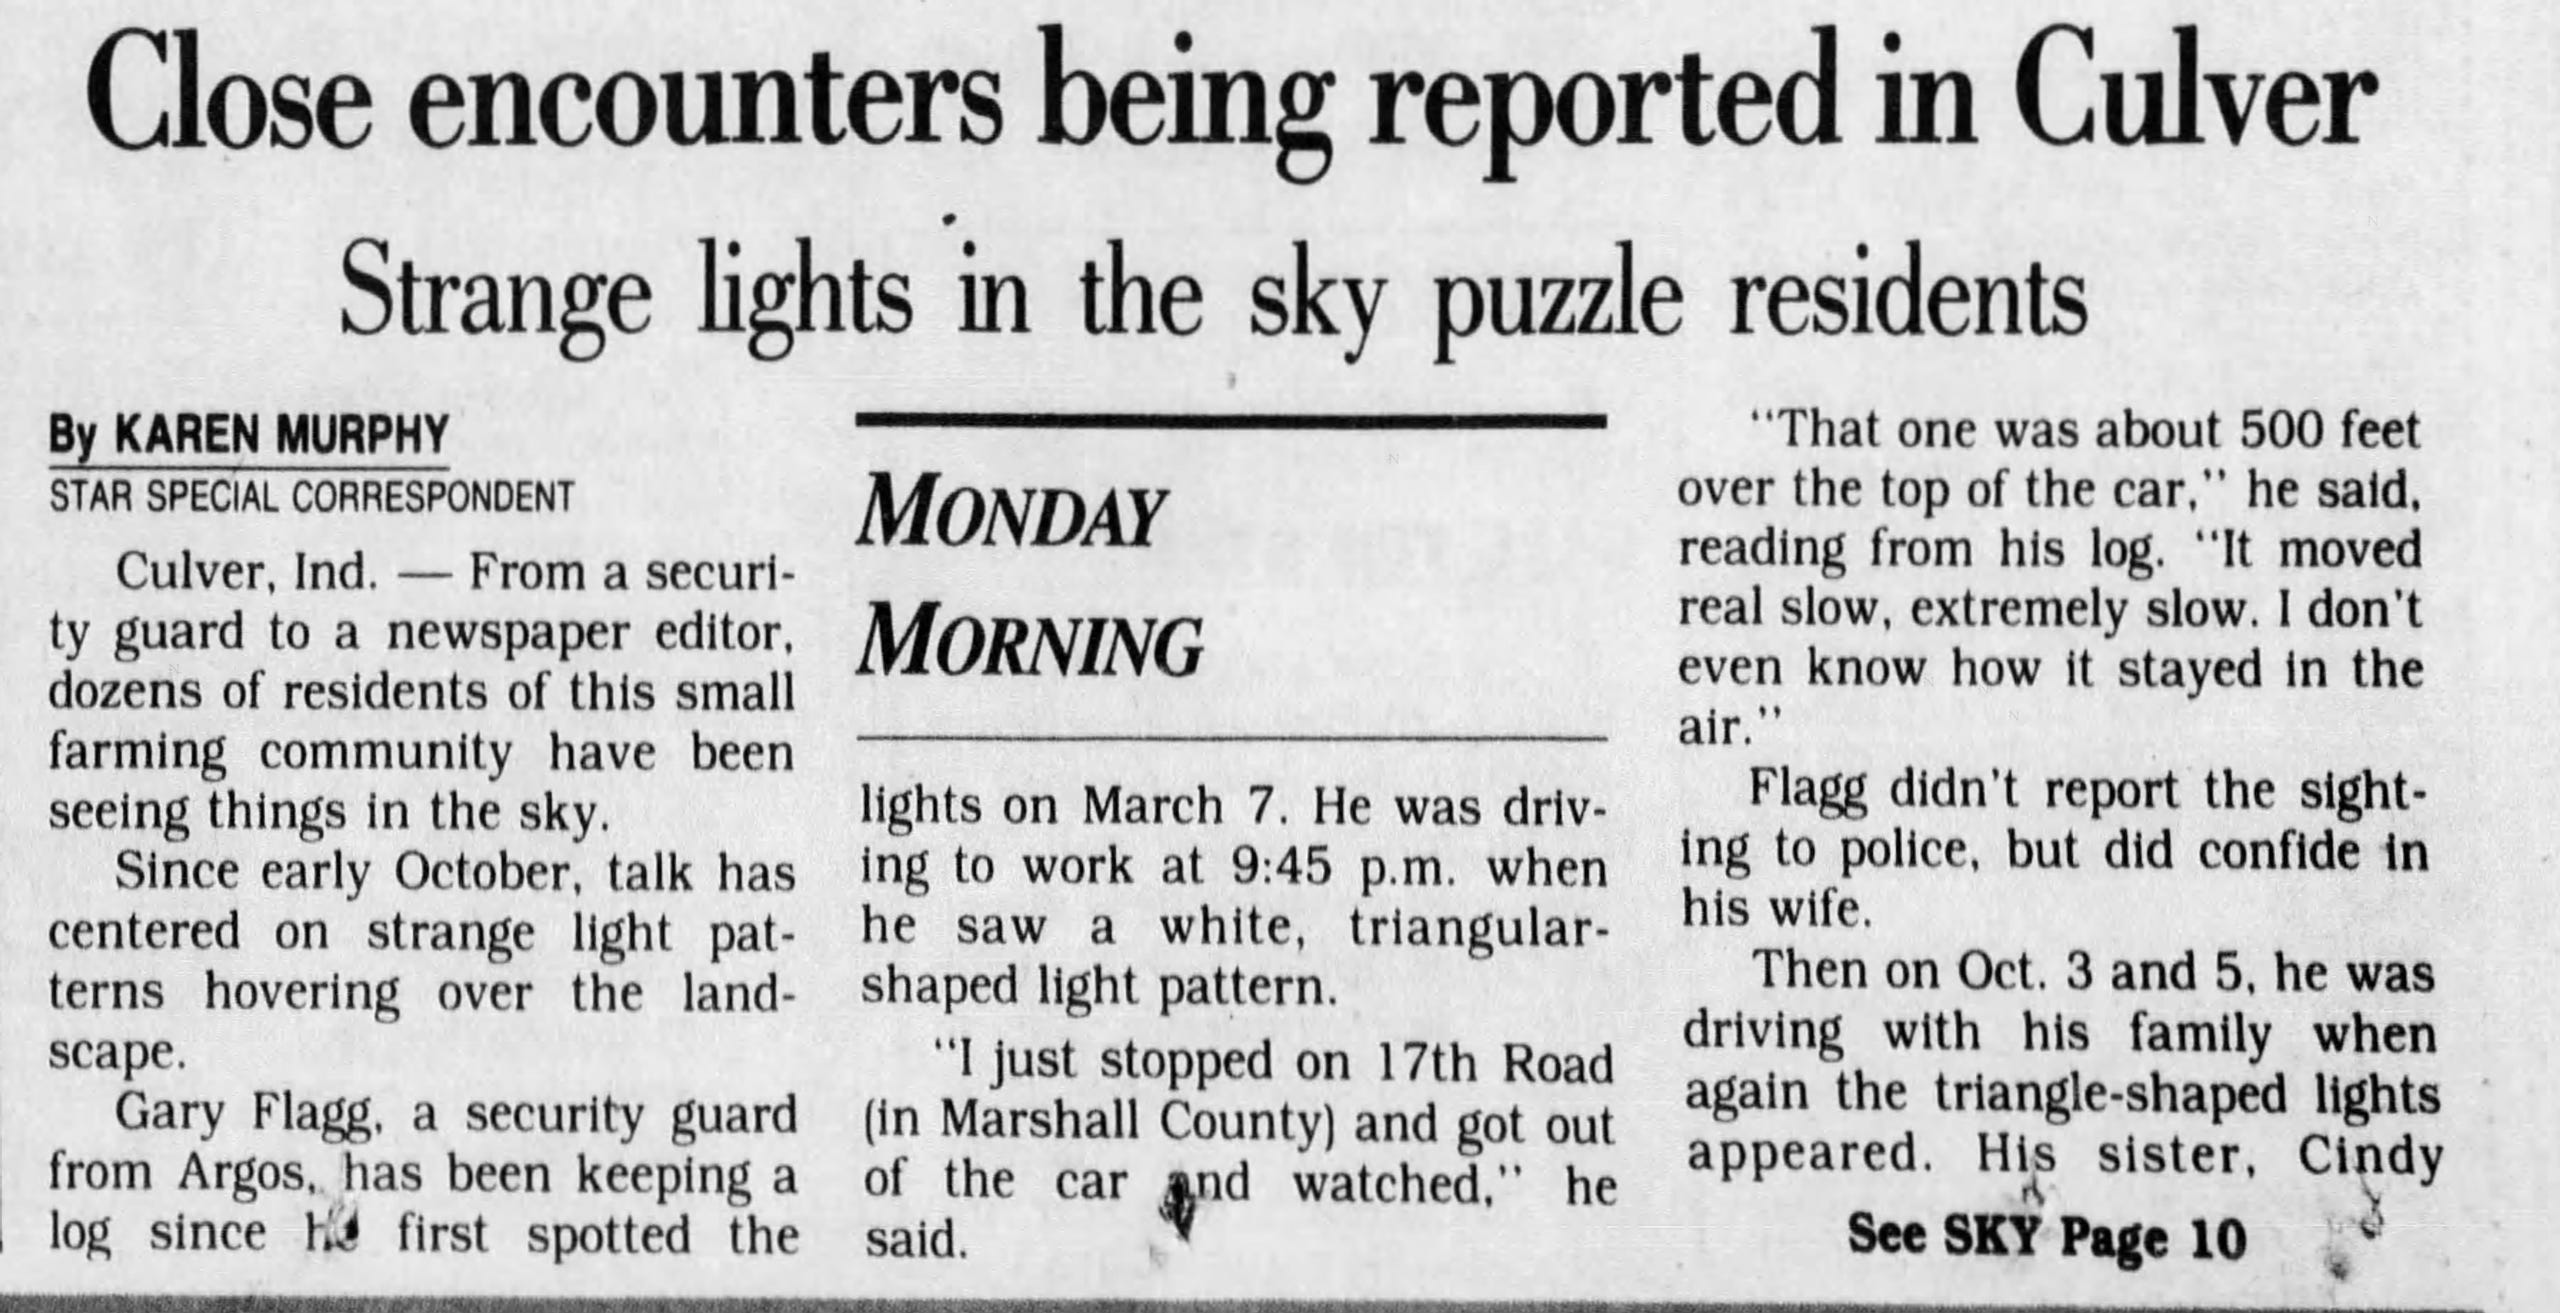 A Nov. 19, 1990 Indianapolis Star article reports on "close encounters" and strange lights in Culver, Ind.